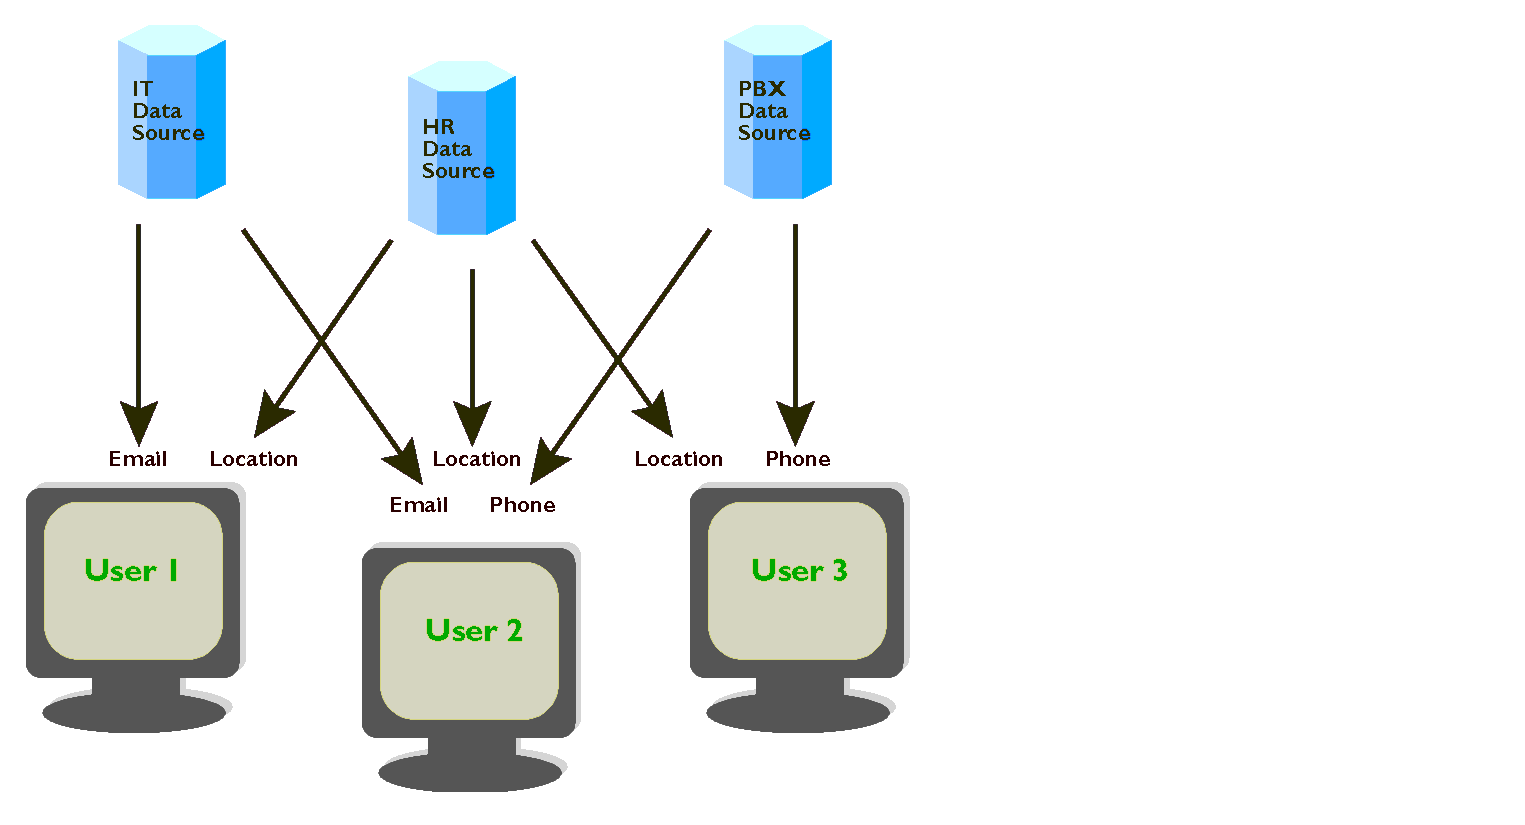 Figure is a representation of the ’Manual Data Synchronization’ process without using Meta-Directory.